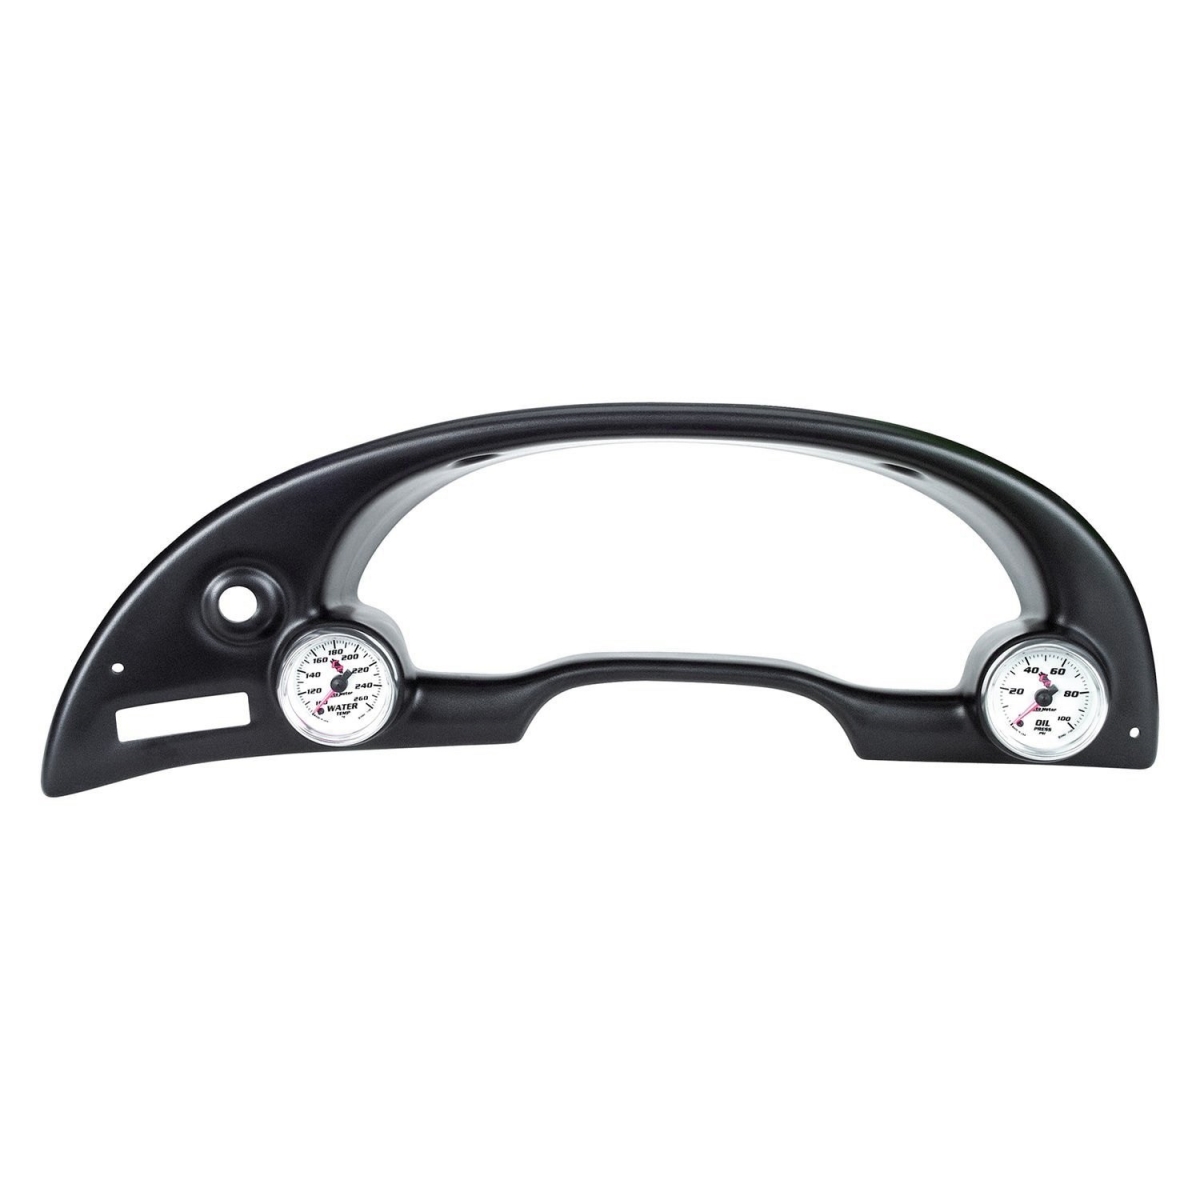 Picture of Auto Meter 10003 52 mm Black Dual Instrument Cluster Bezel for 1994-2000 Ford Mustang